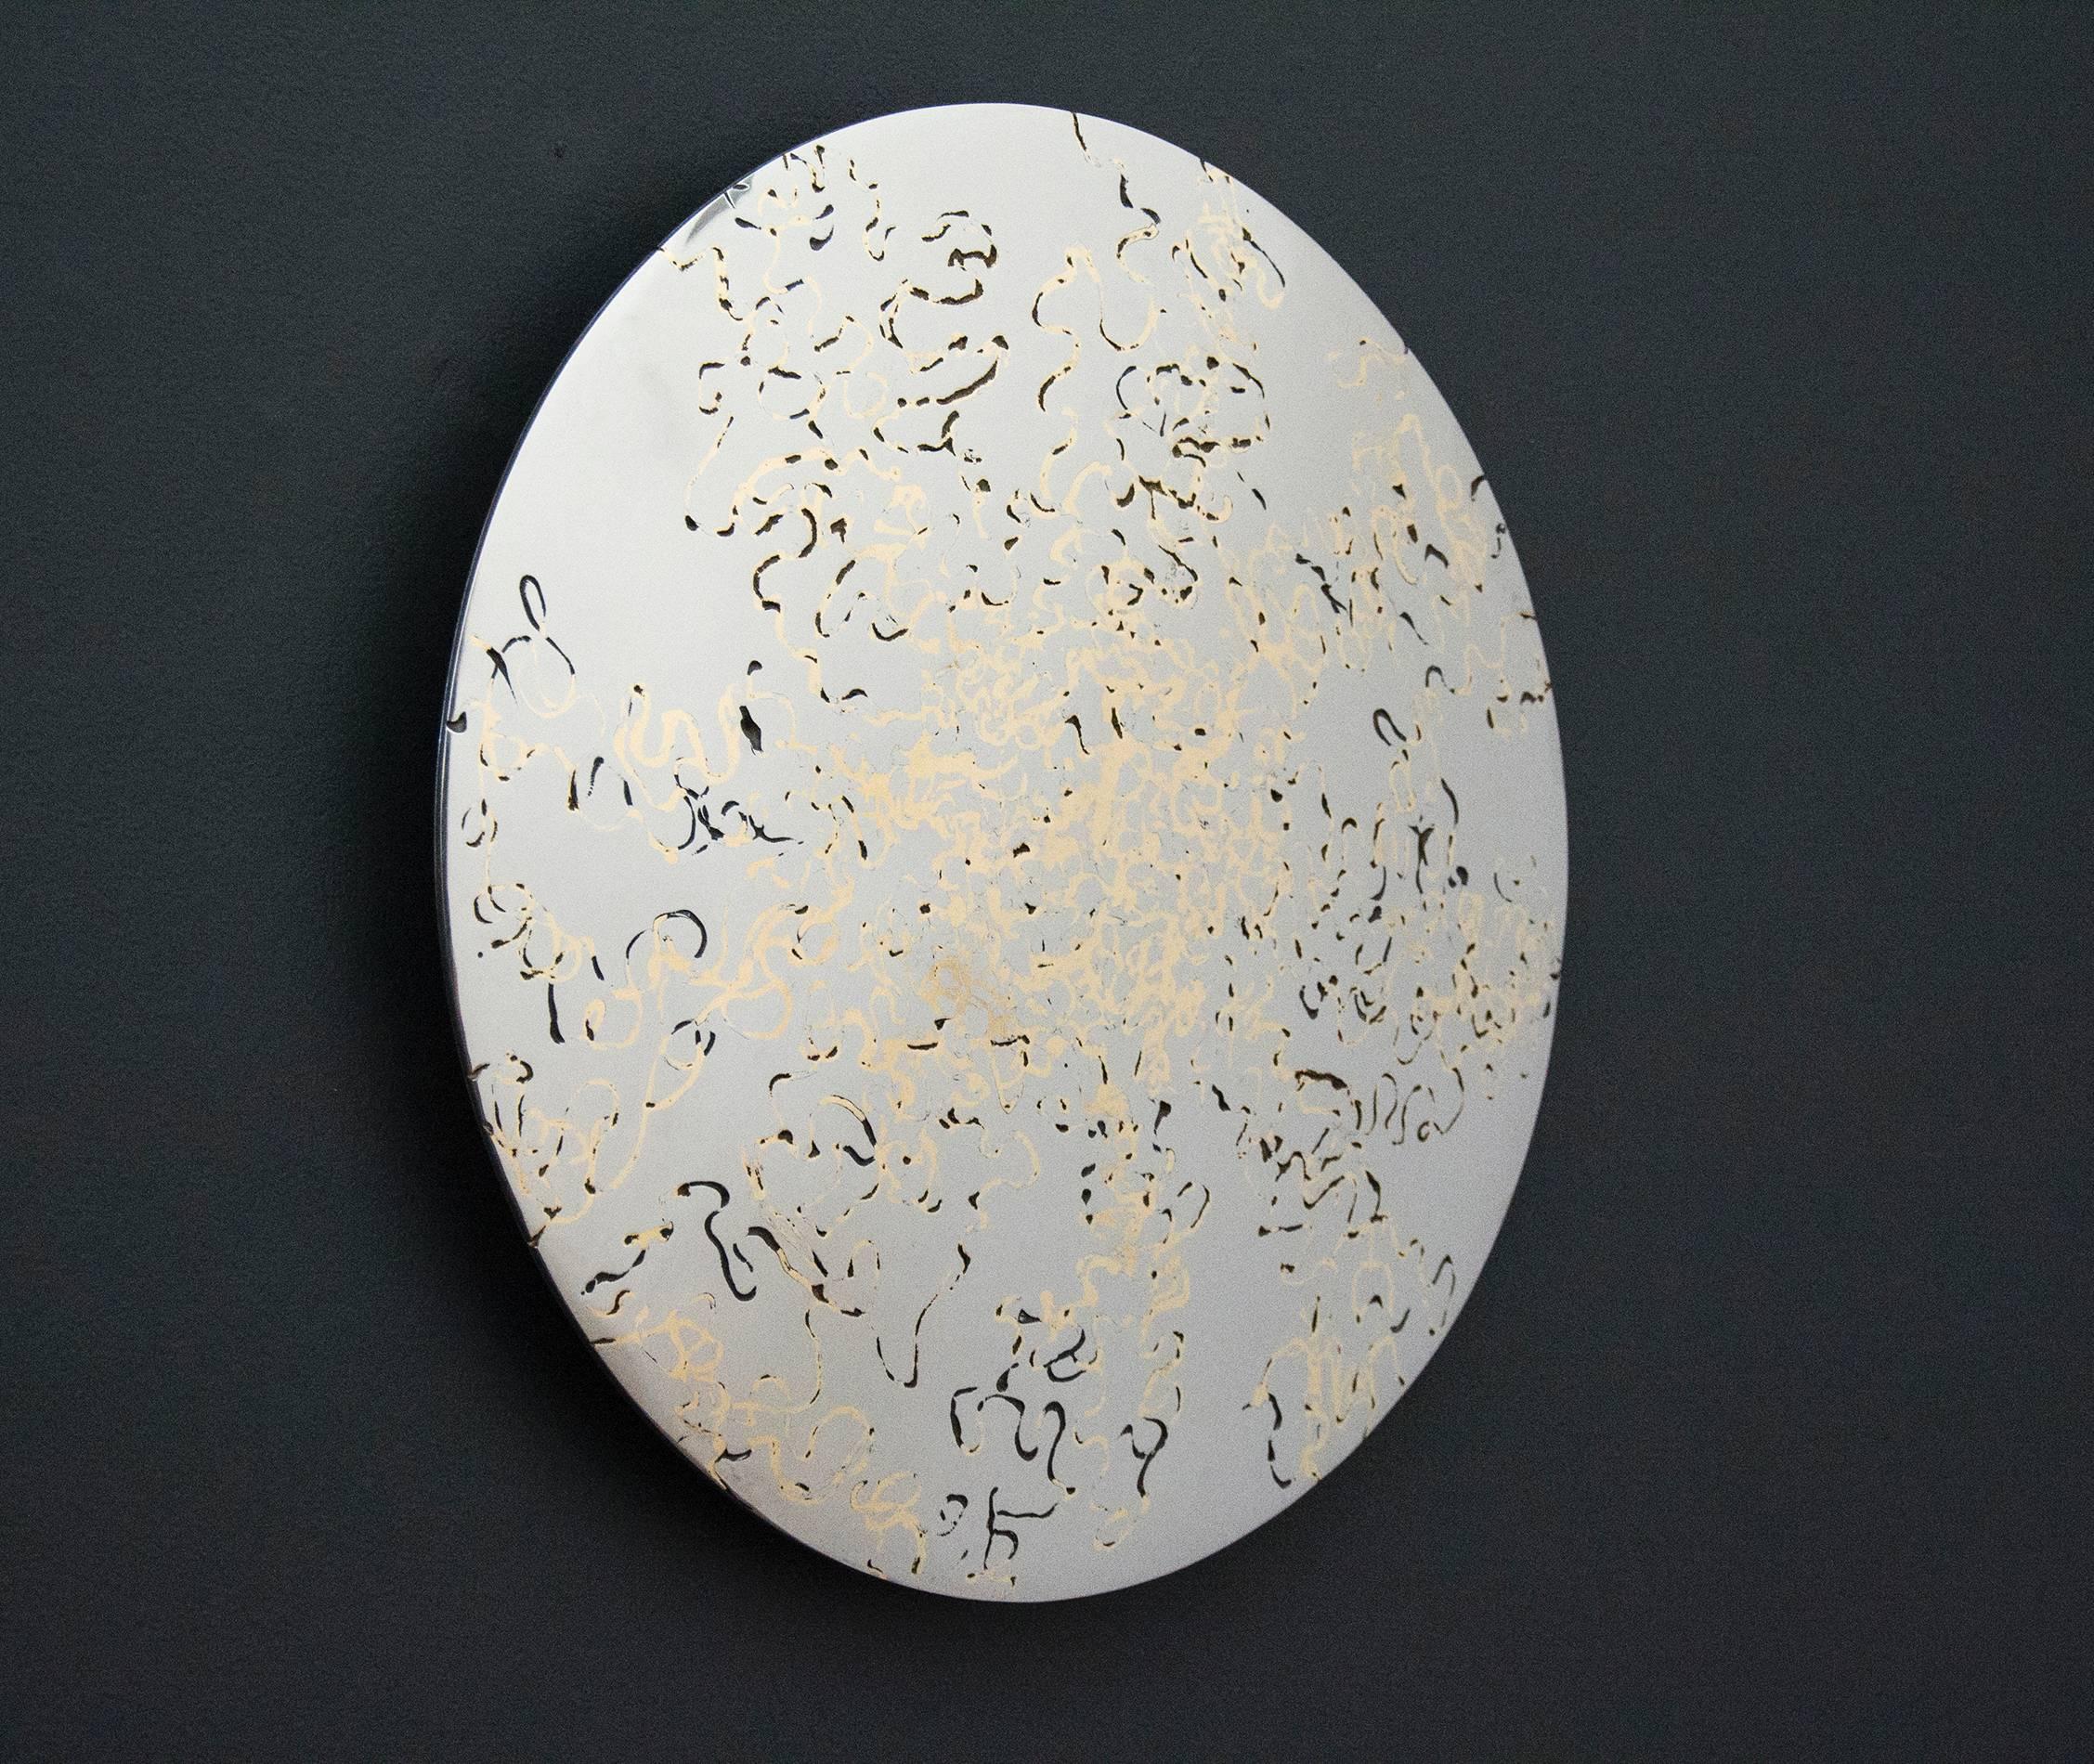 Shayne Dark Abstract Sculpture - Reflecting Nature Series No 1 - polished stainless steel, copper, wall sculpture